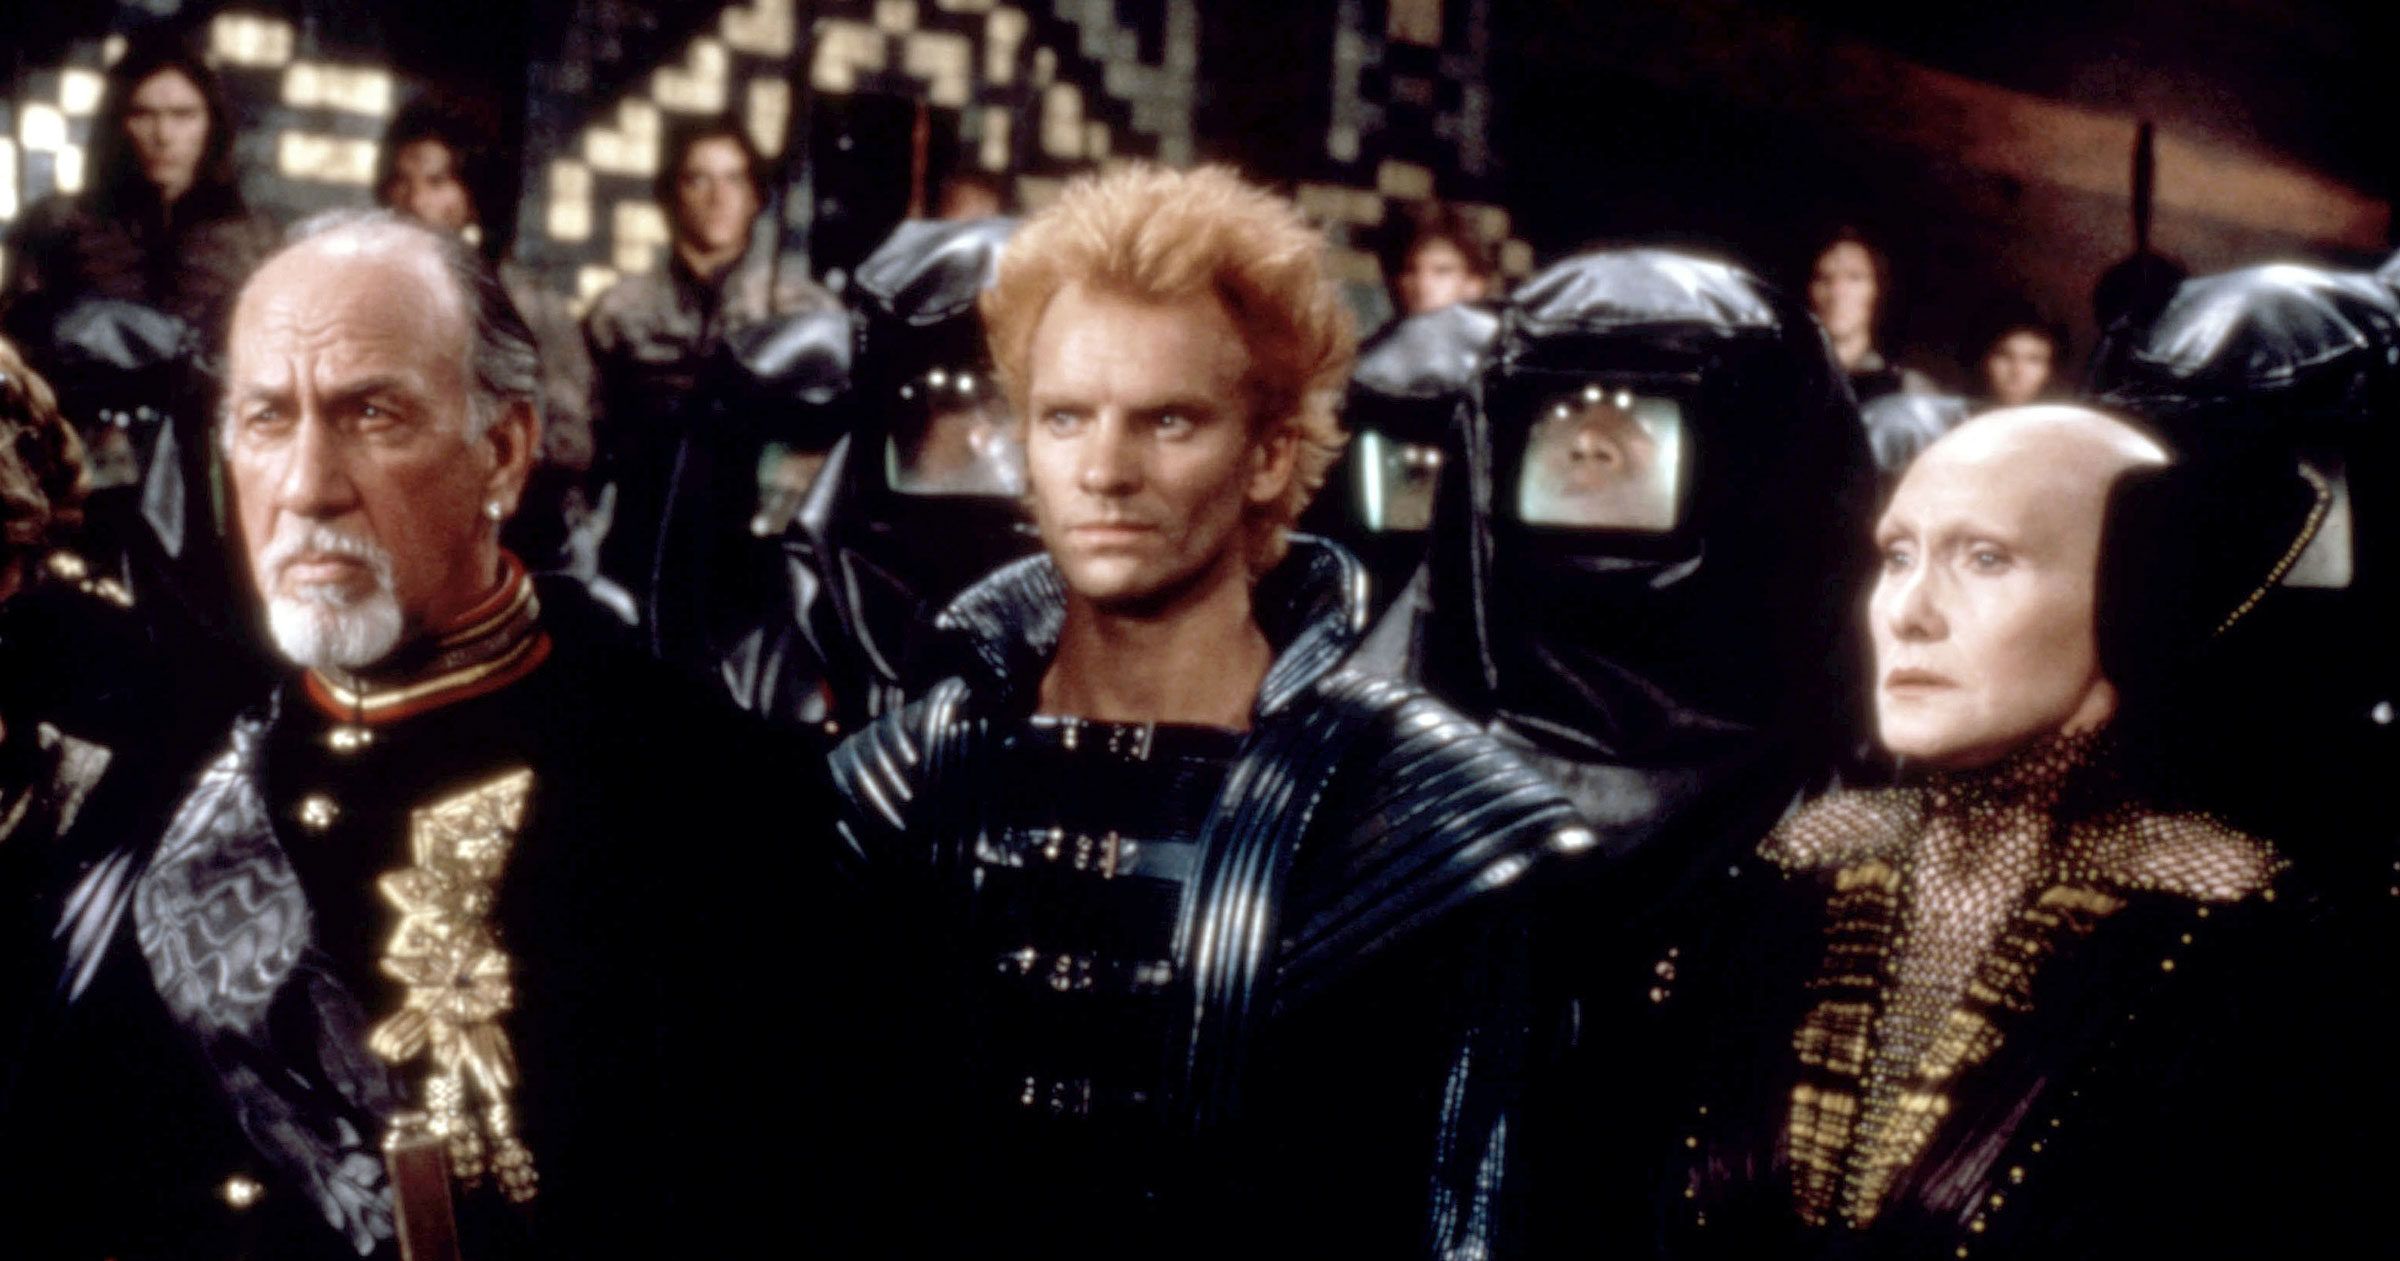 The cast of Dune with Sting in the middle